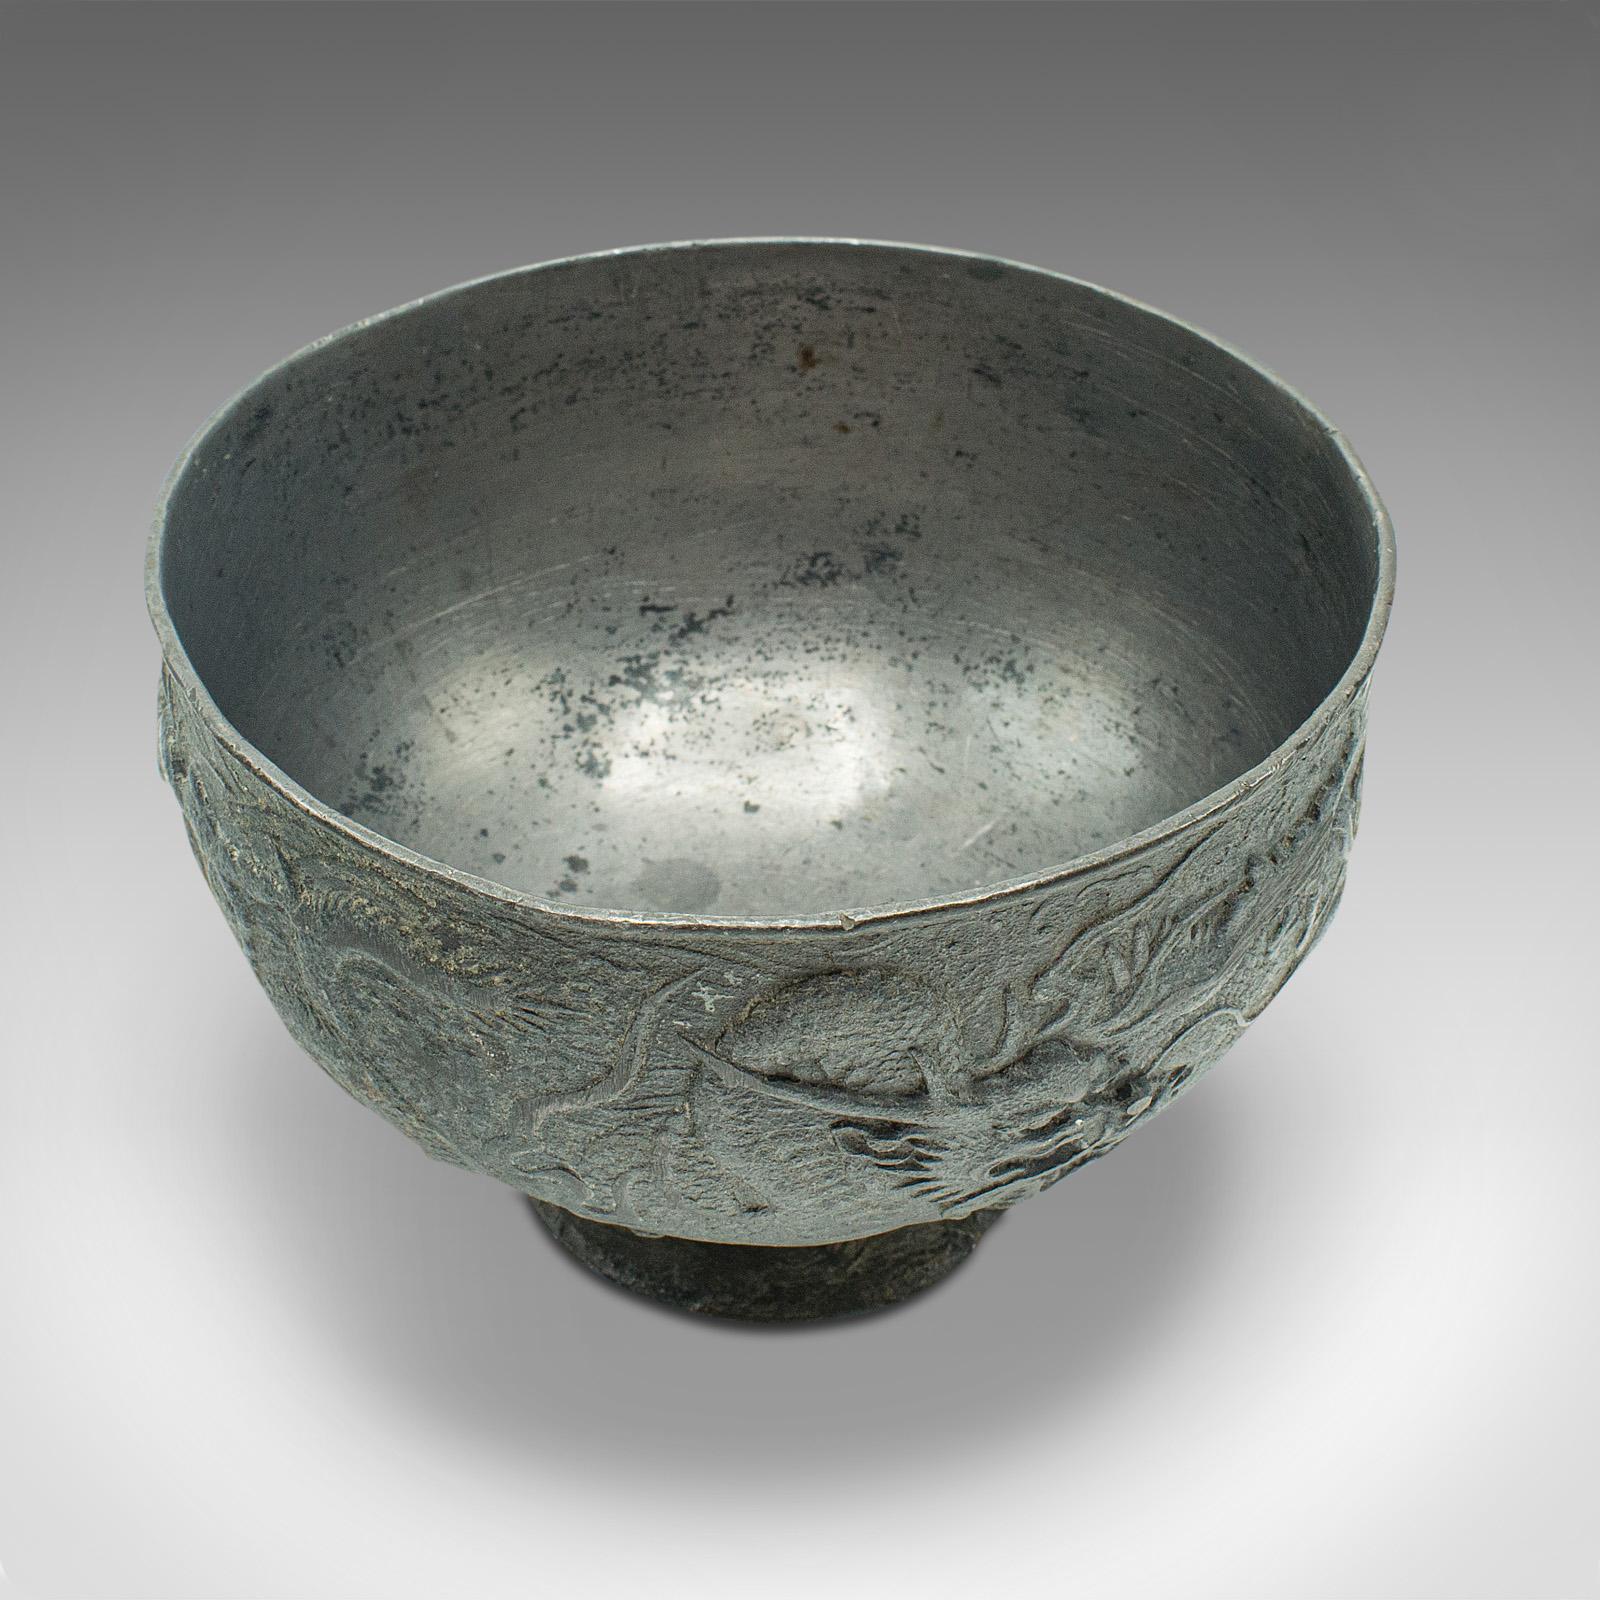 Antique Libation Cup, Chinese, Lead Alloy, Decorative Bowl, Victorian, C.1880 For Sale 1